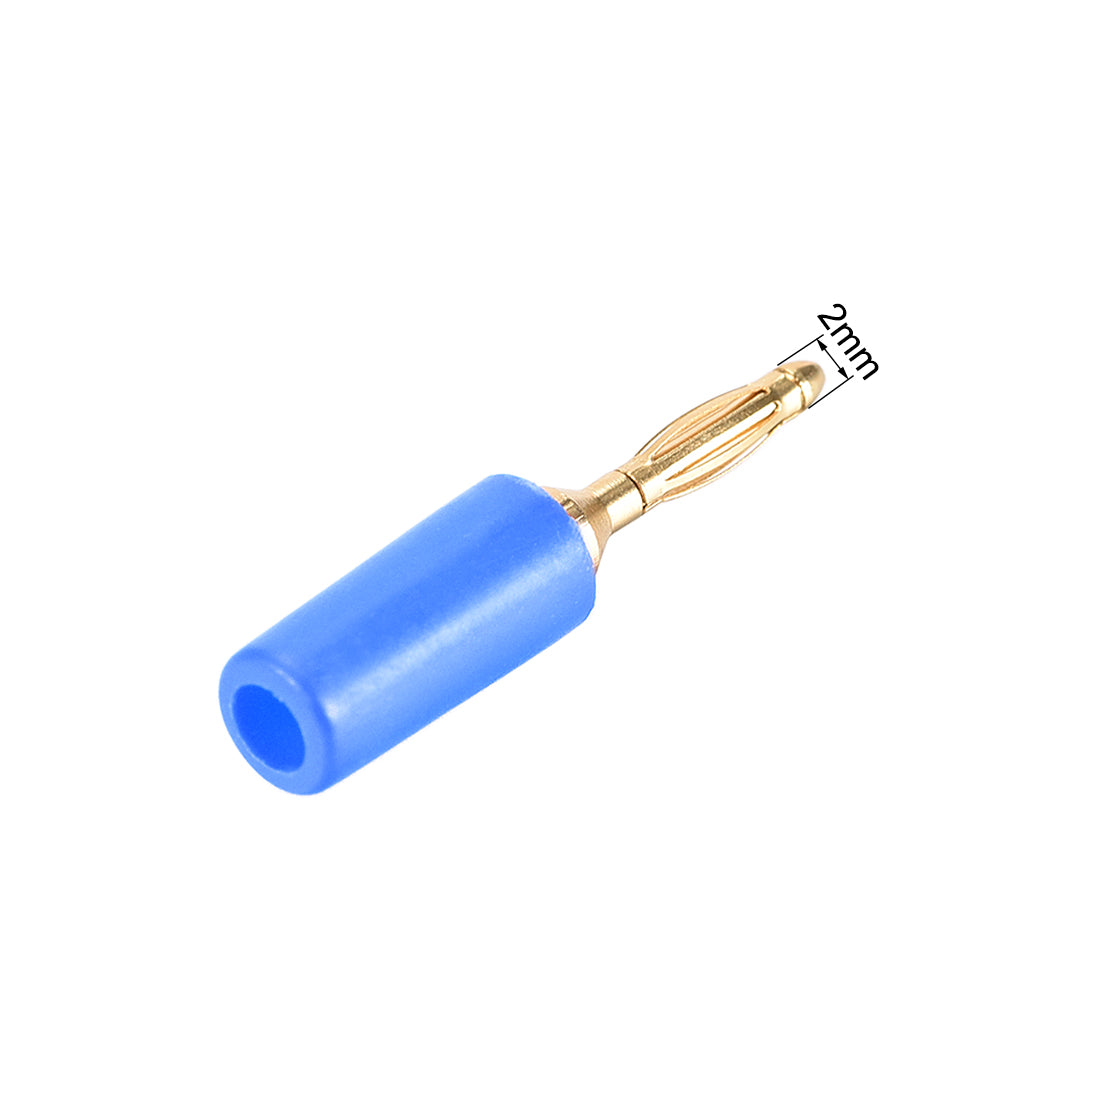 uxcell Uxcell 2mm Banana Speaker Wire Cable Plugs Connectors Gold Blue 5pcs Jack Connector